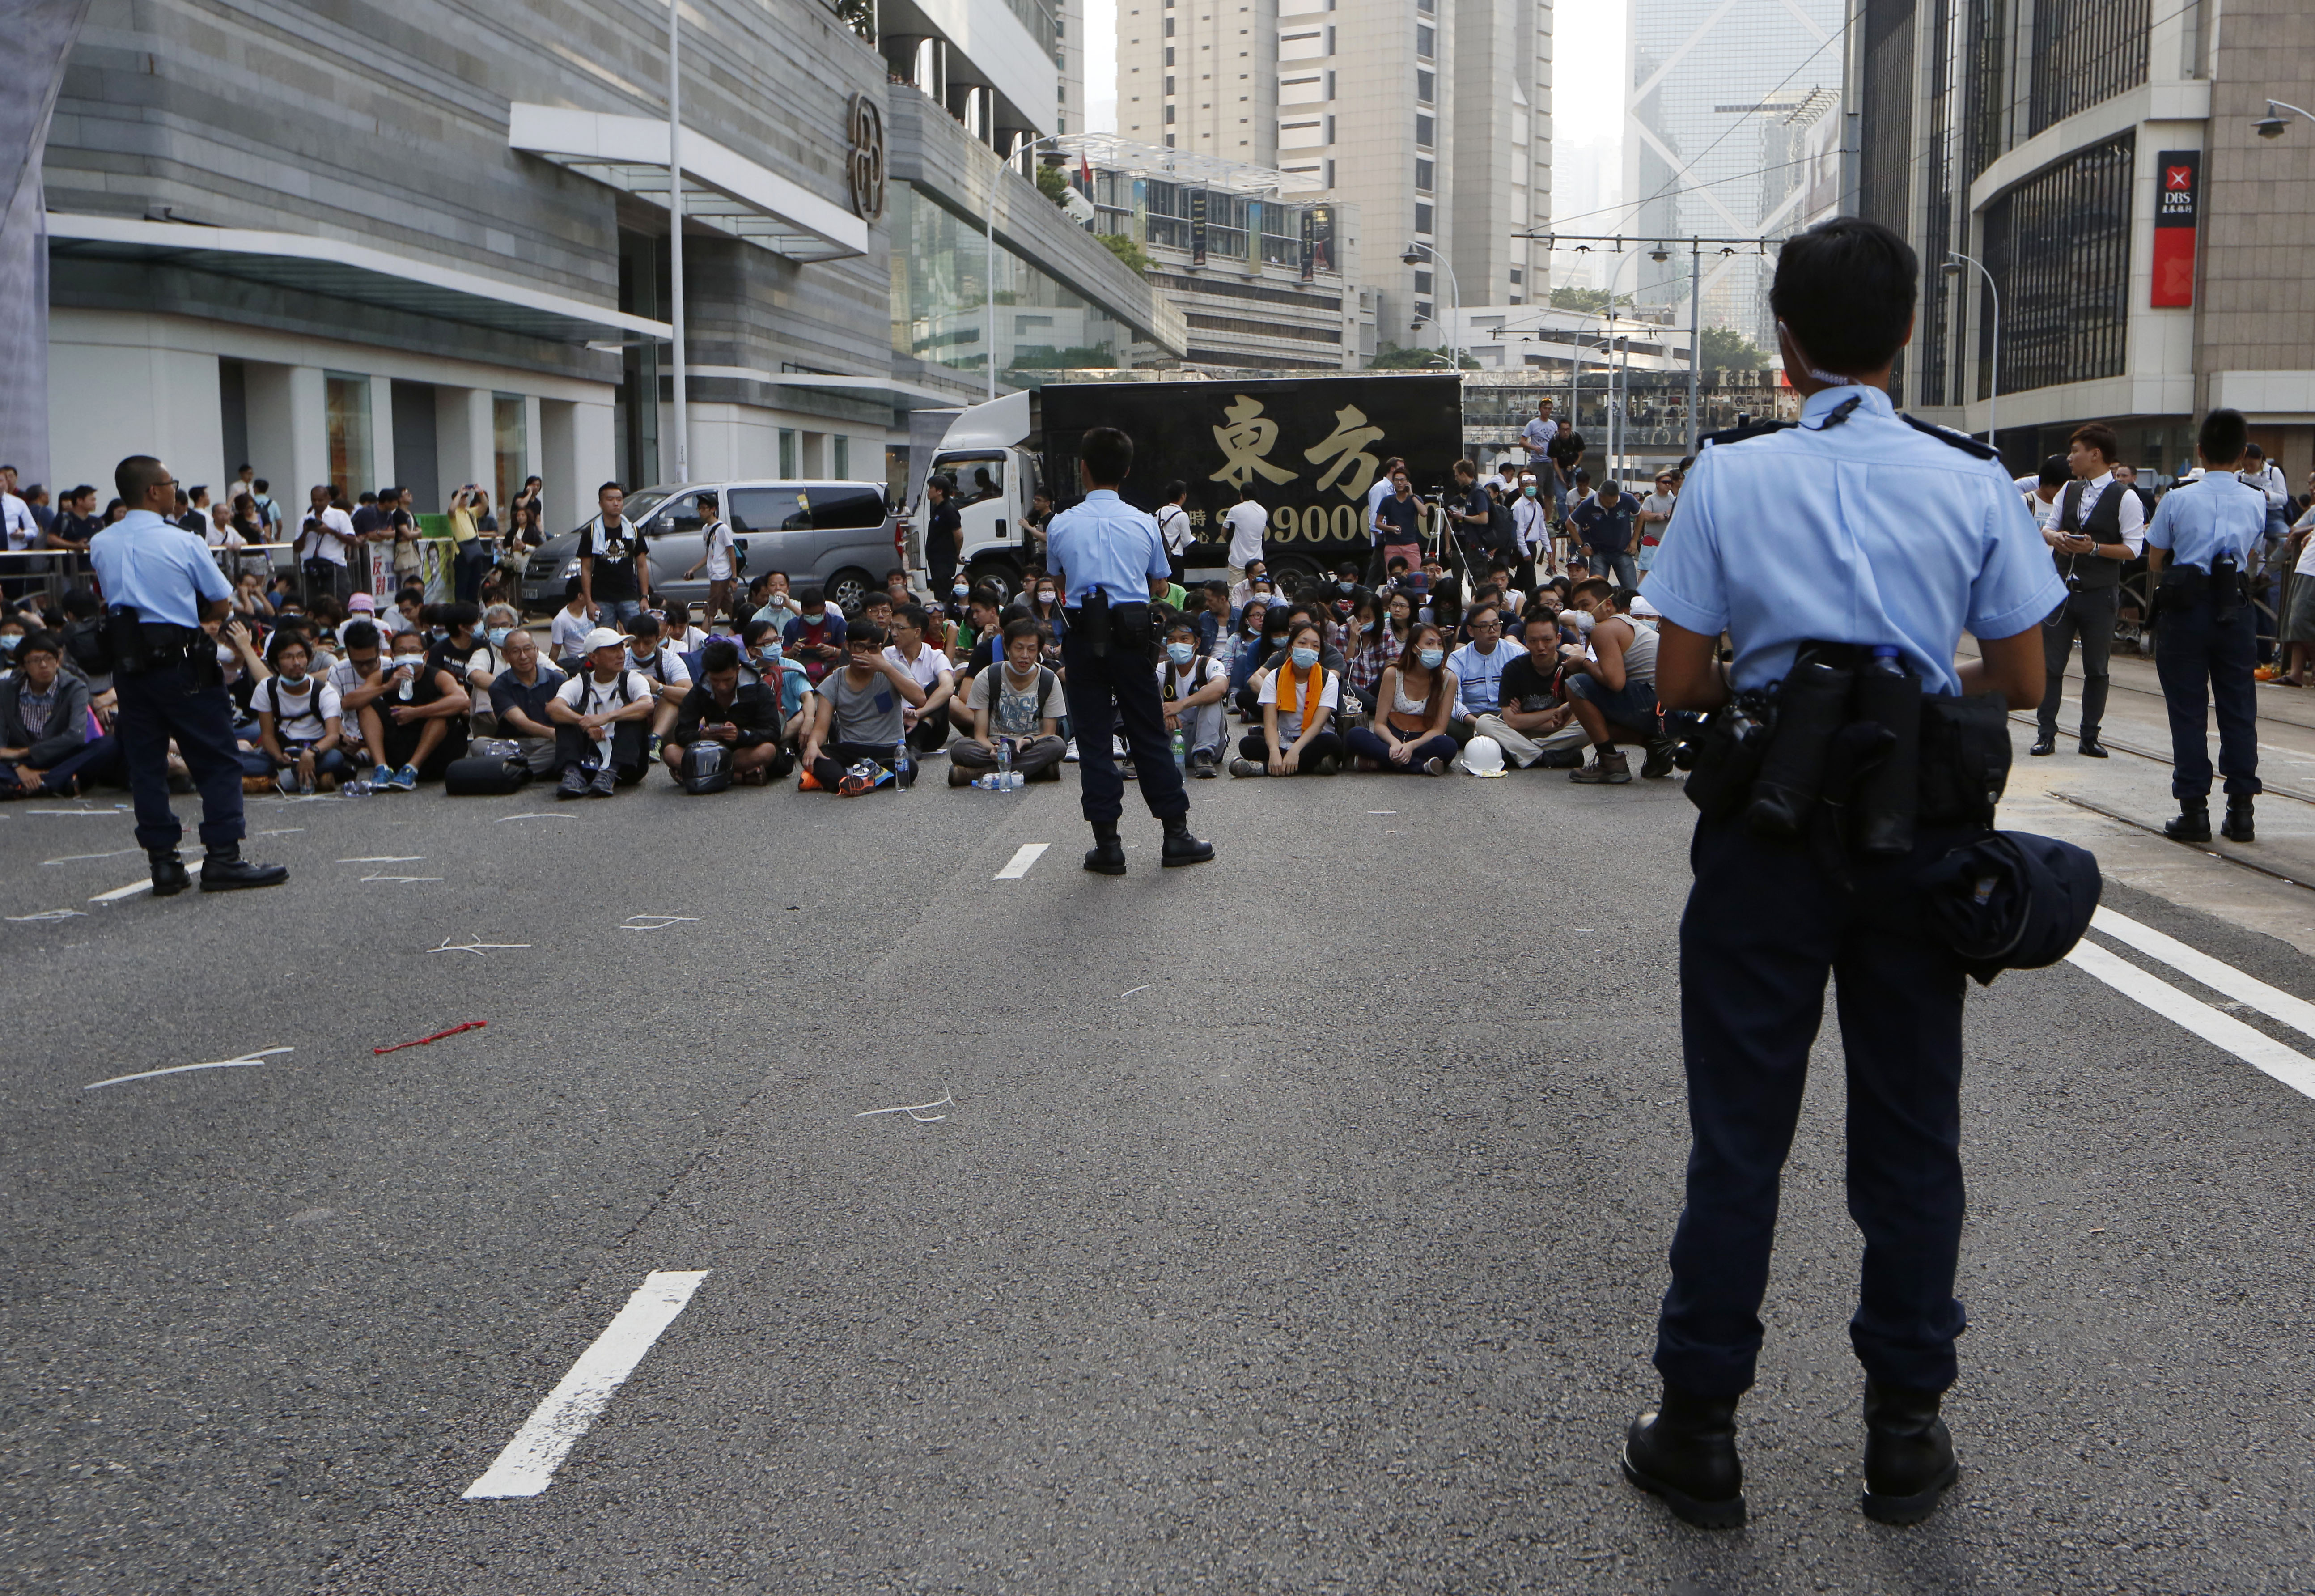 Police officers stand guard in front of pro-democracy protesters in the occupied areas outside the government headquarters in Hong Kong's Admiralty, Monday, Oct. 13, 2014.